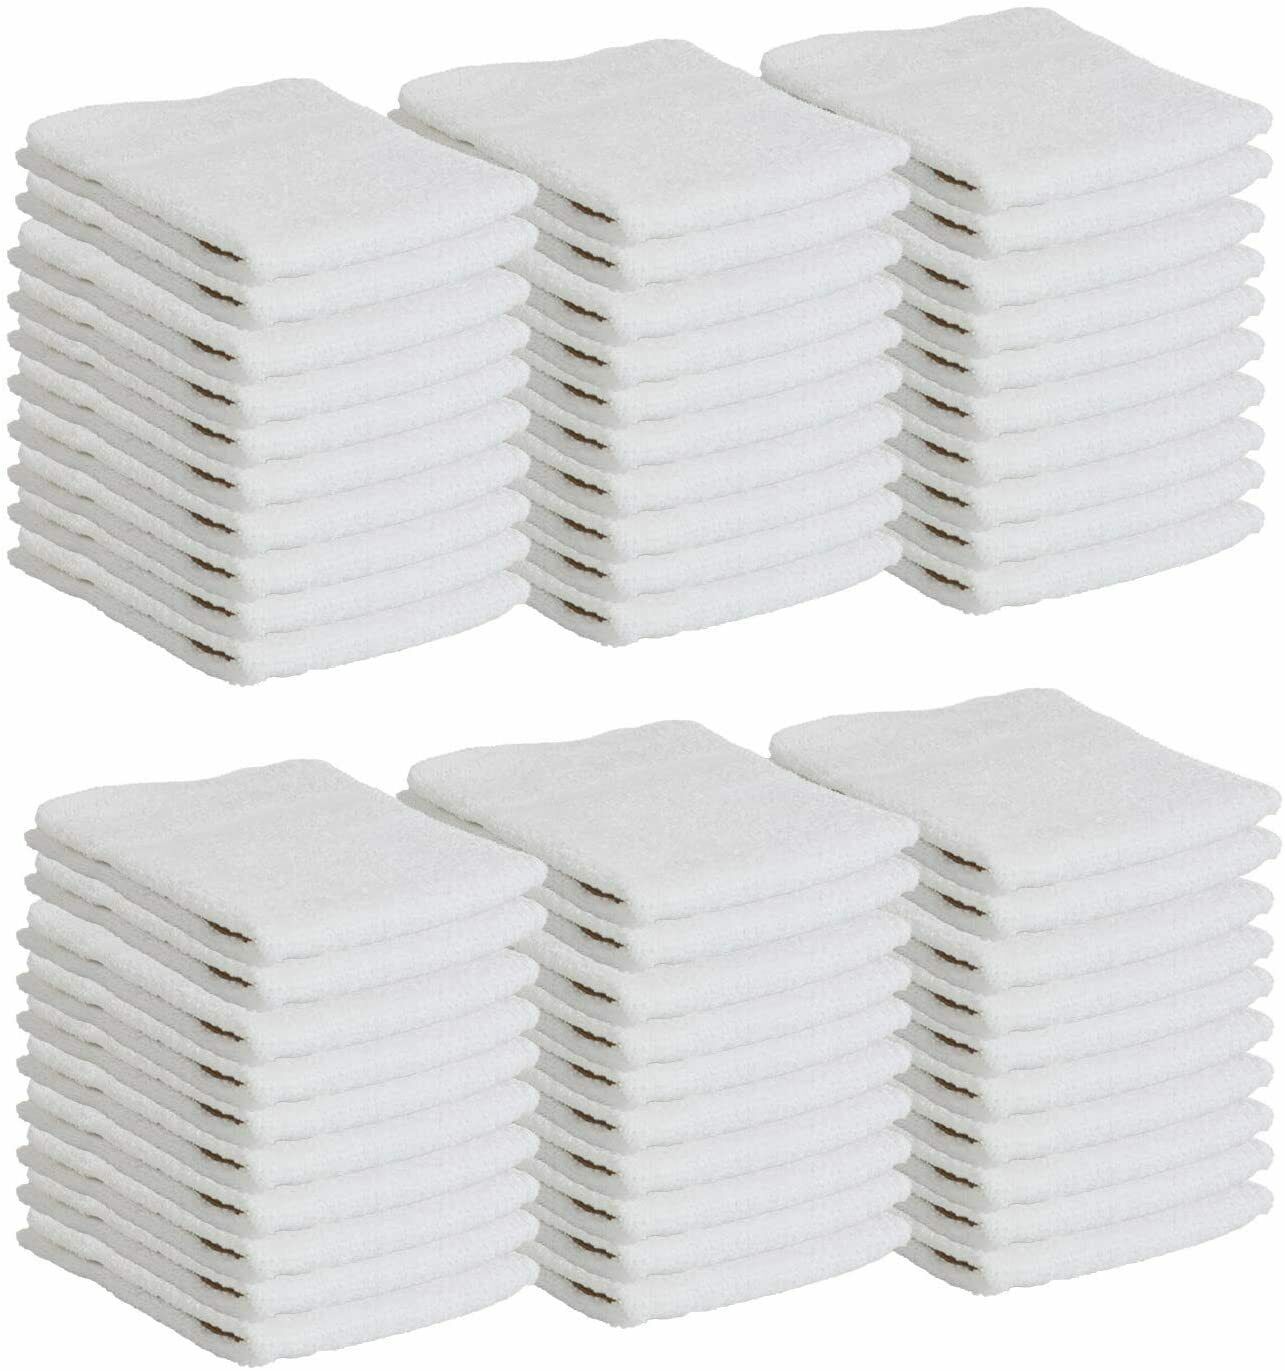 Bulk 60 Pack Of Washcloths - 12 X 12 White Fingertip Towels - Quick-dry Cotton